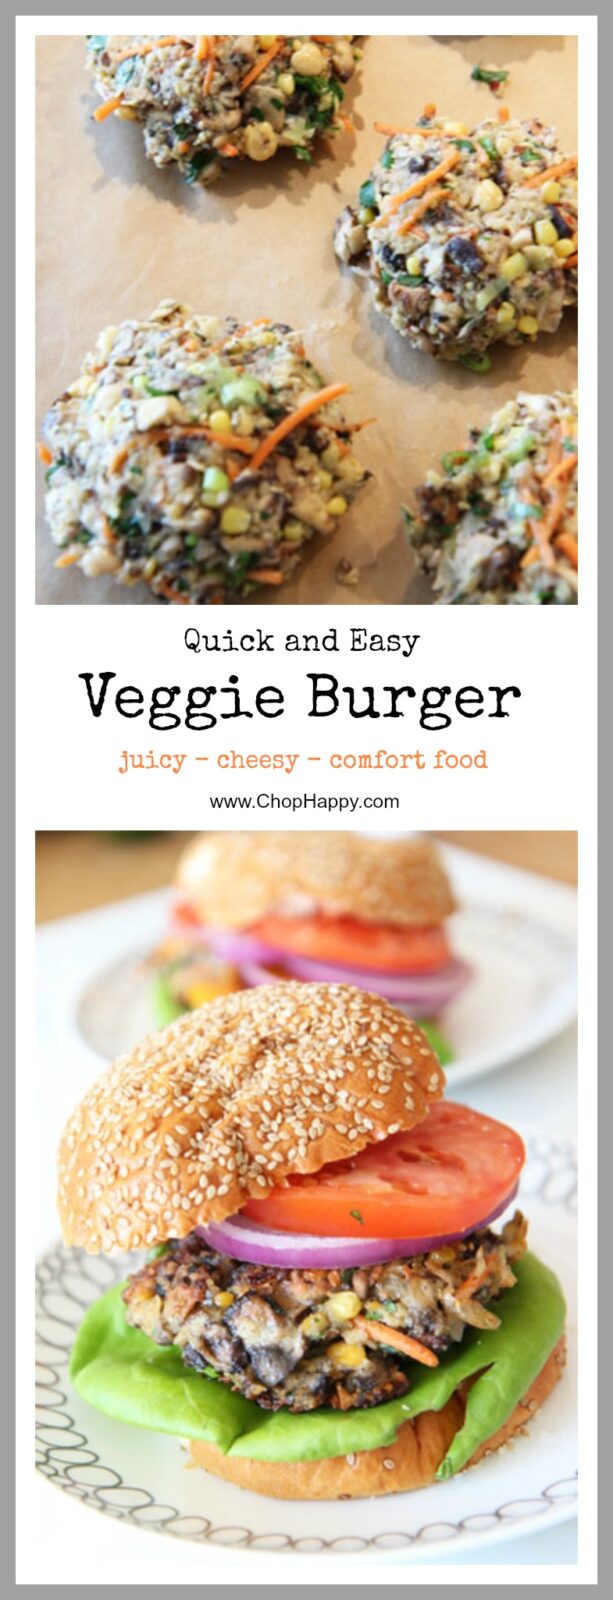 Easy Veggie Burger Recipe - that will make even a meat eater love this burger. The best part is you throw abunch of veggies, cheese, and eggs in a bowl and patties are ready quickly. www.ChopHappy.com